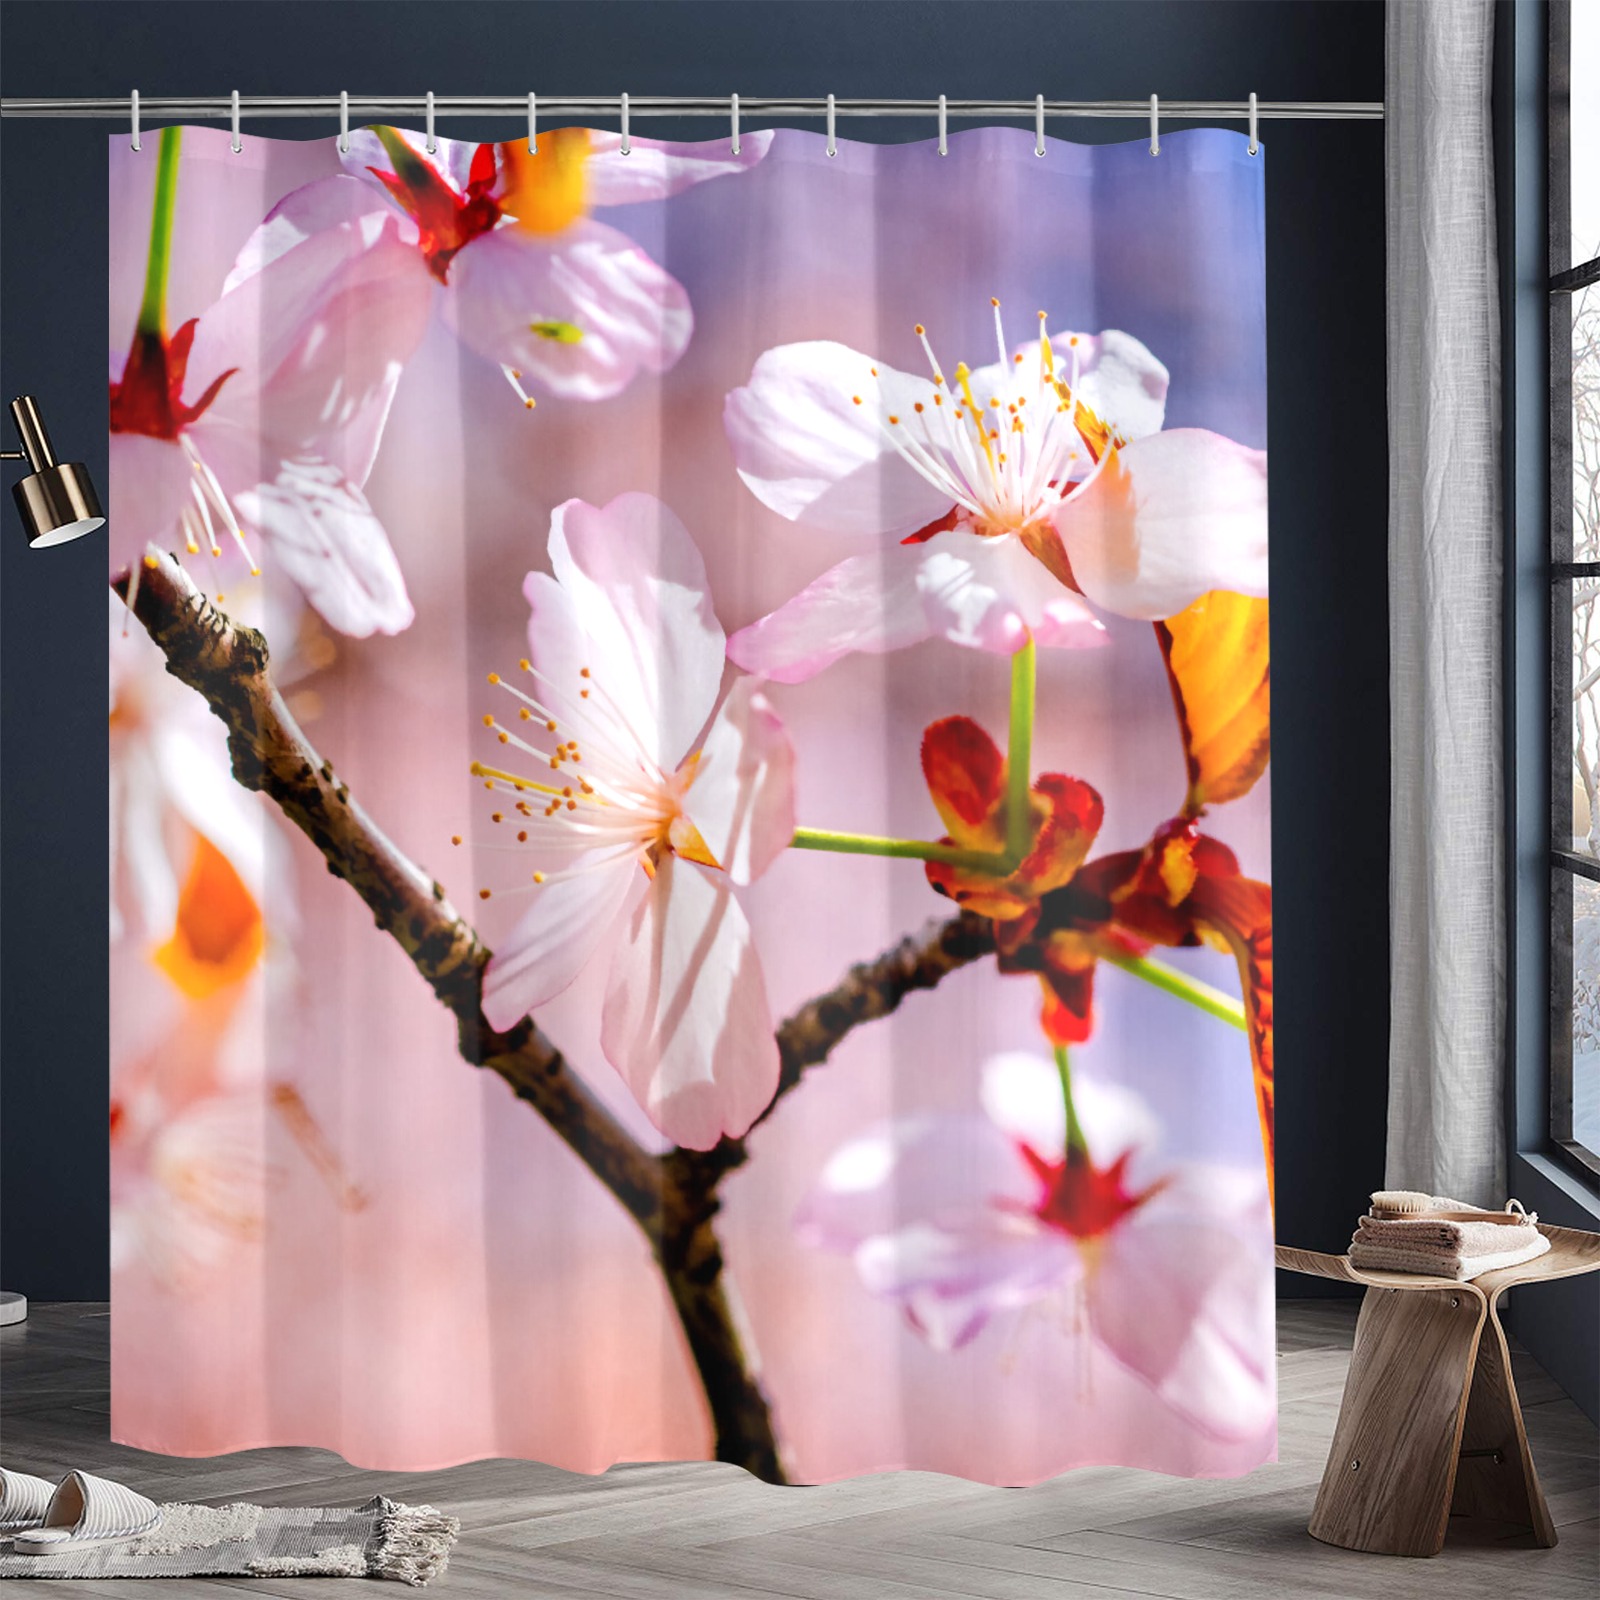 Sakura flowers. The festival of life and youth. Shower Curtain 72"x84"